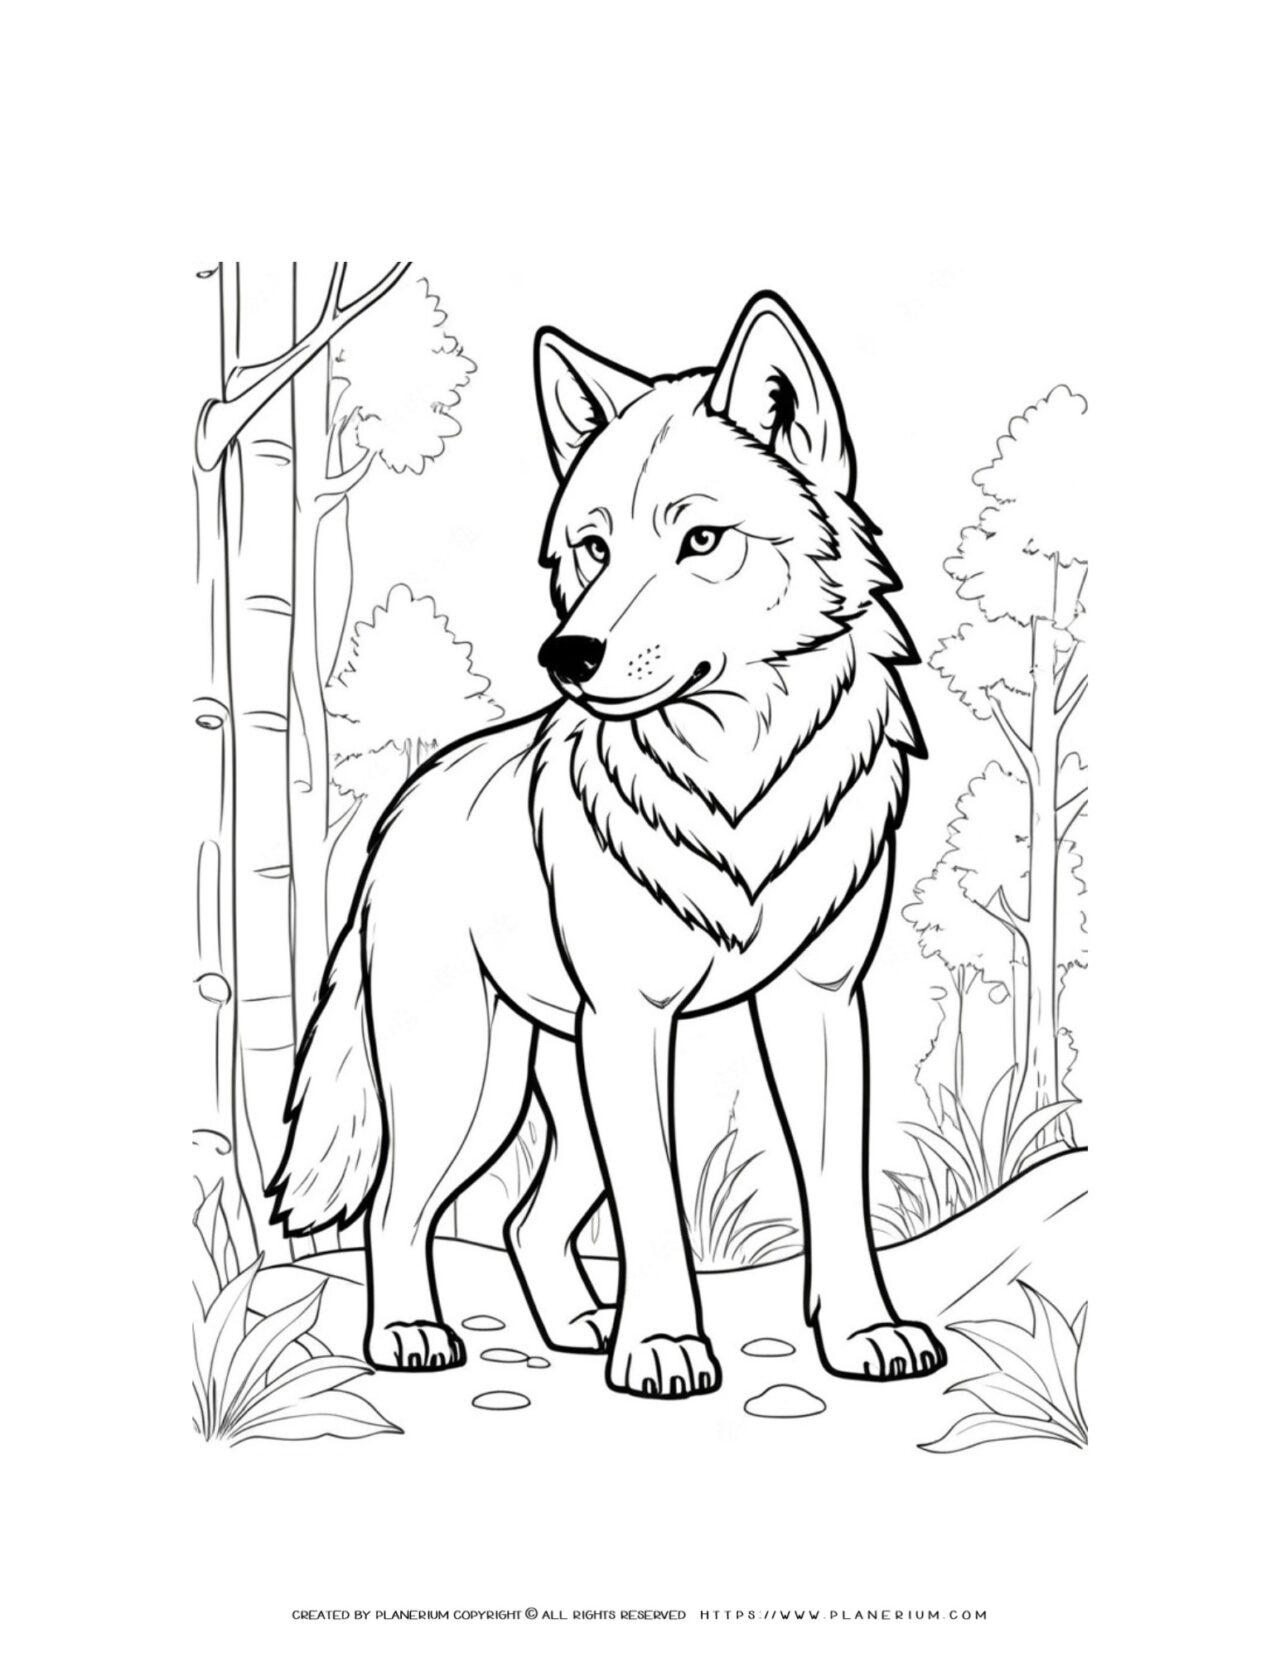 wolf-wild-animal-standing-in-nature-coloring-page